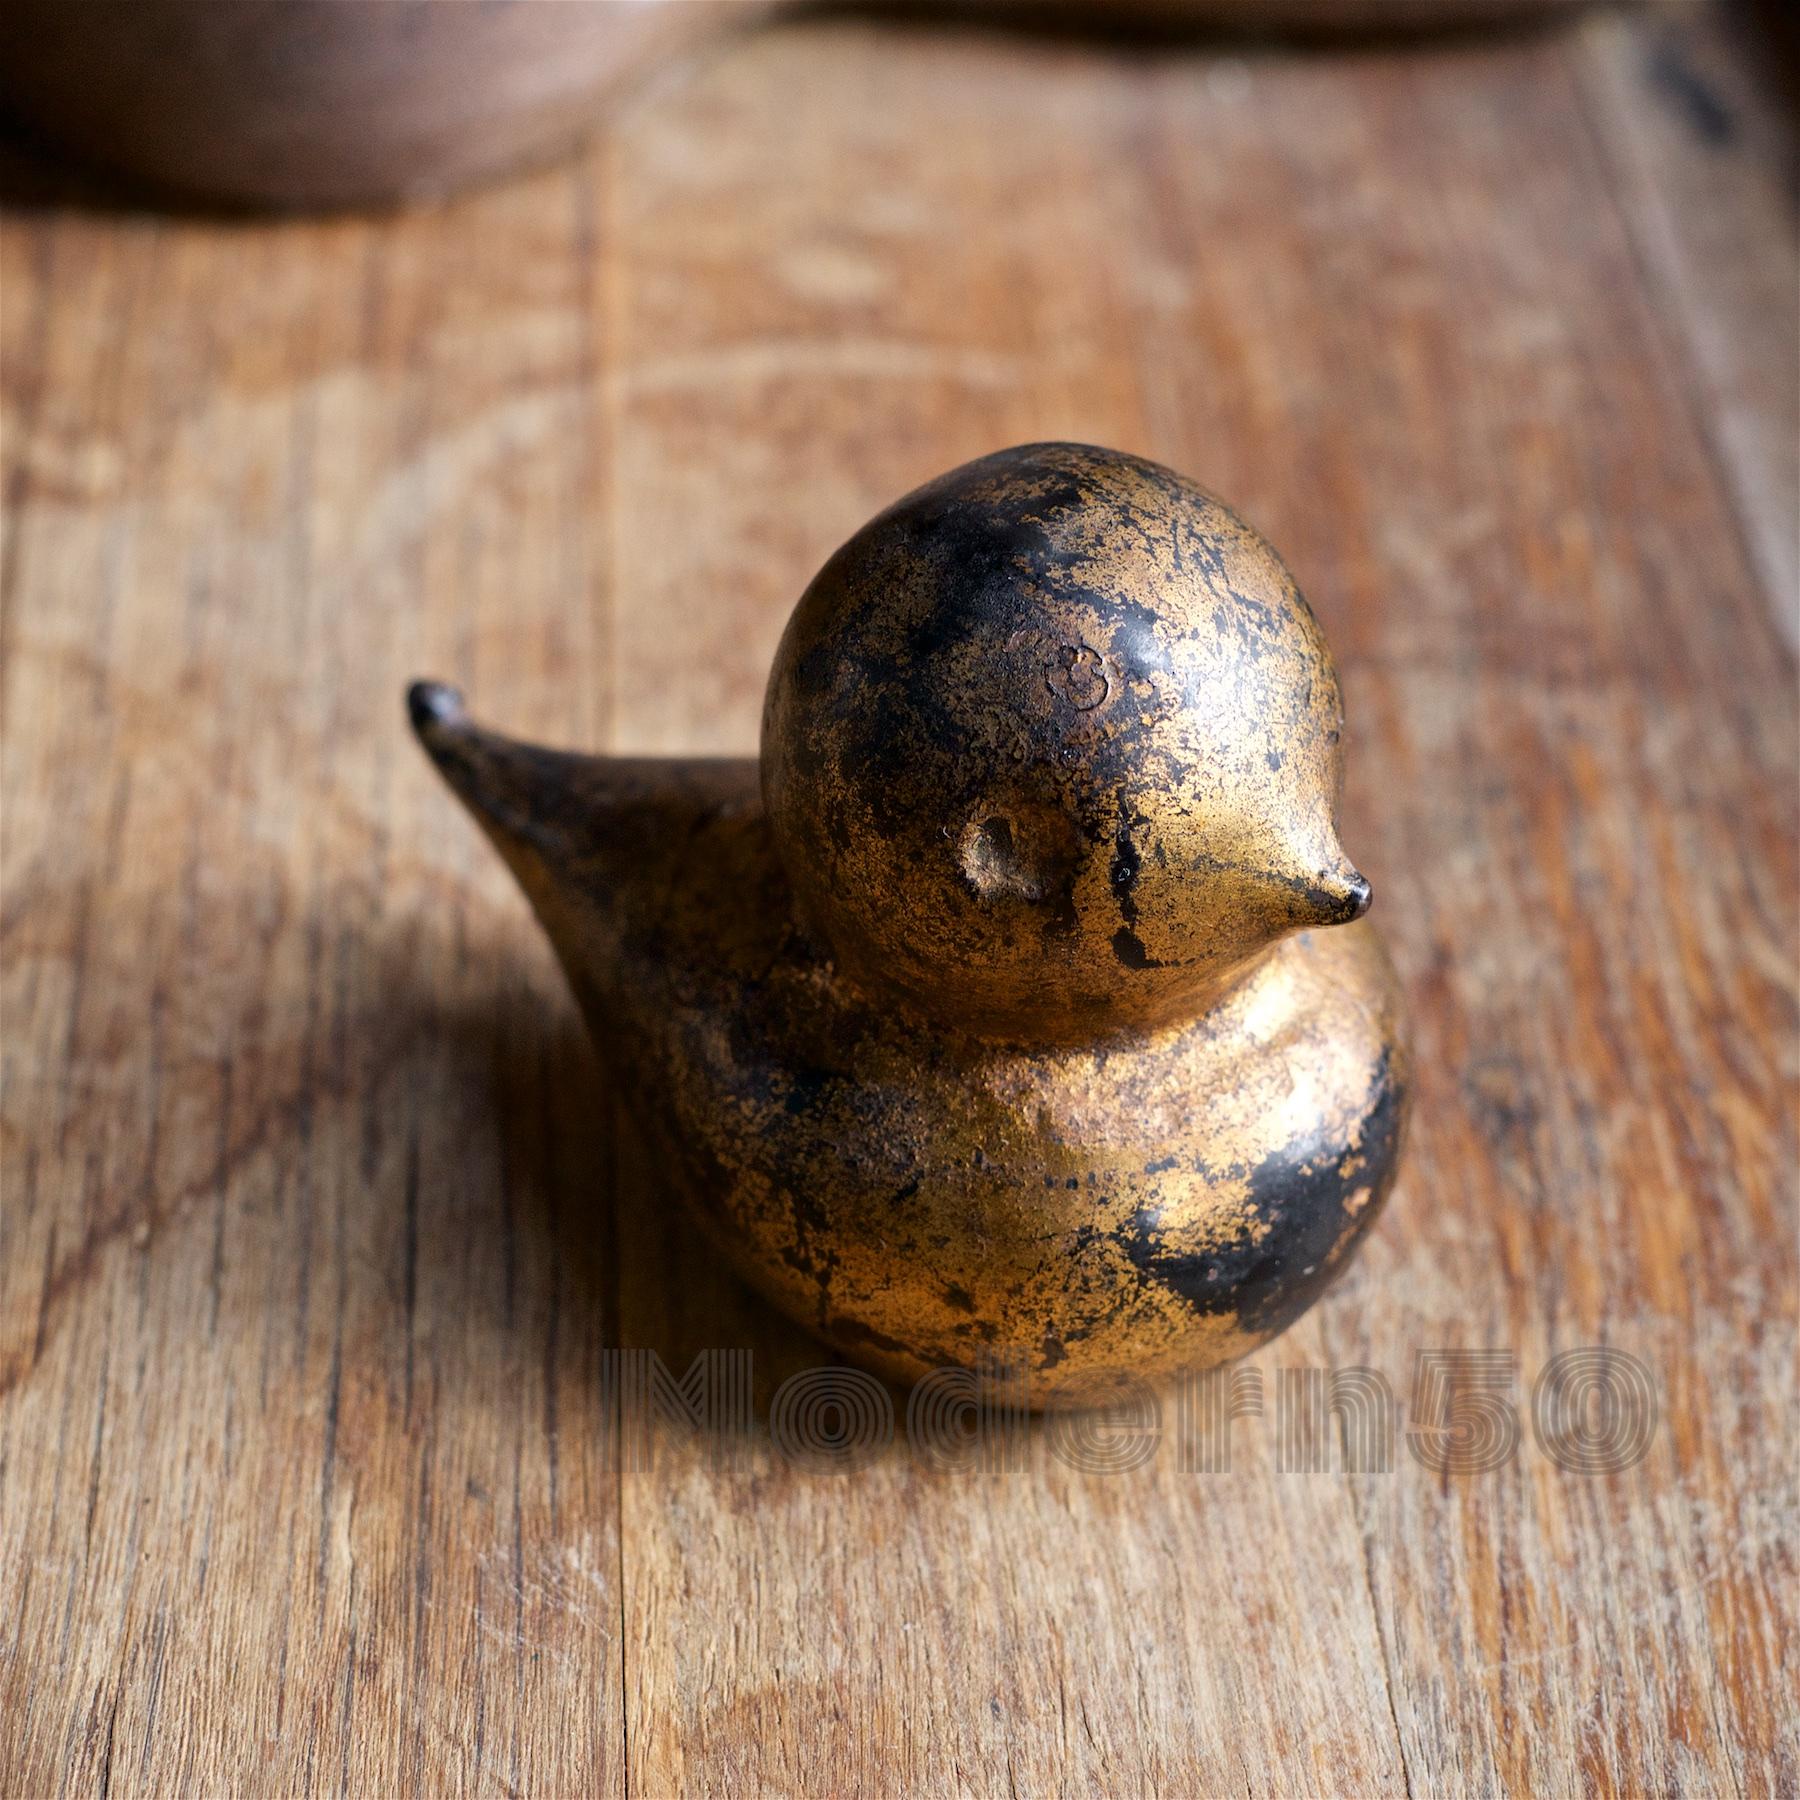 Rare cast iron Kewpie duck object, possibly made in England, circa 1850s. We have seen copies but never one this old. Weighs almost 2.5 lbs. and is 4 inches long.